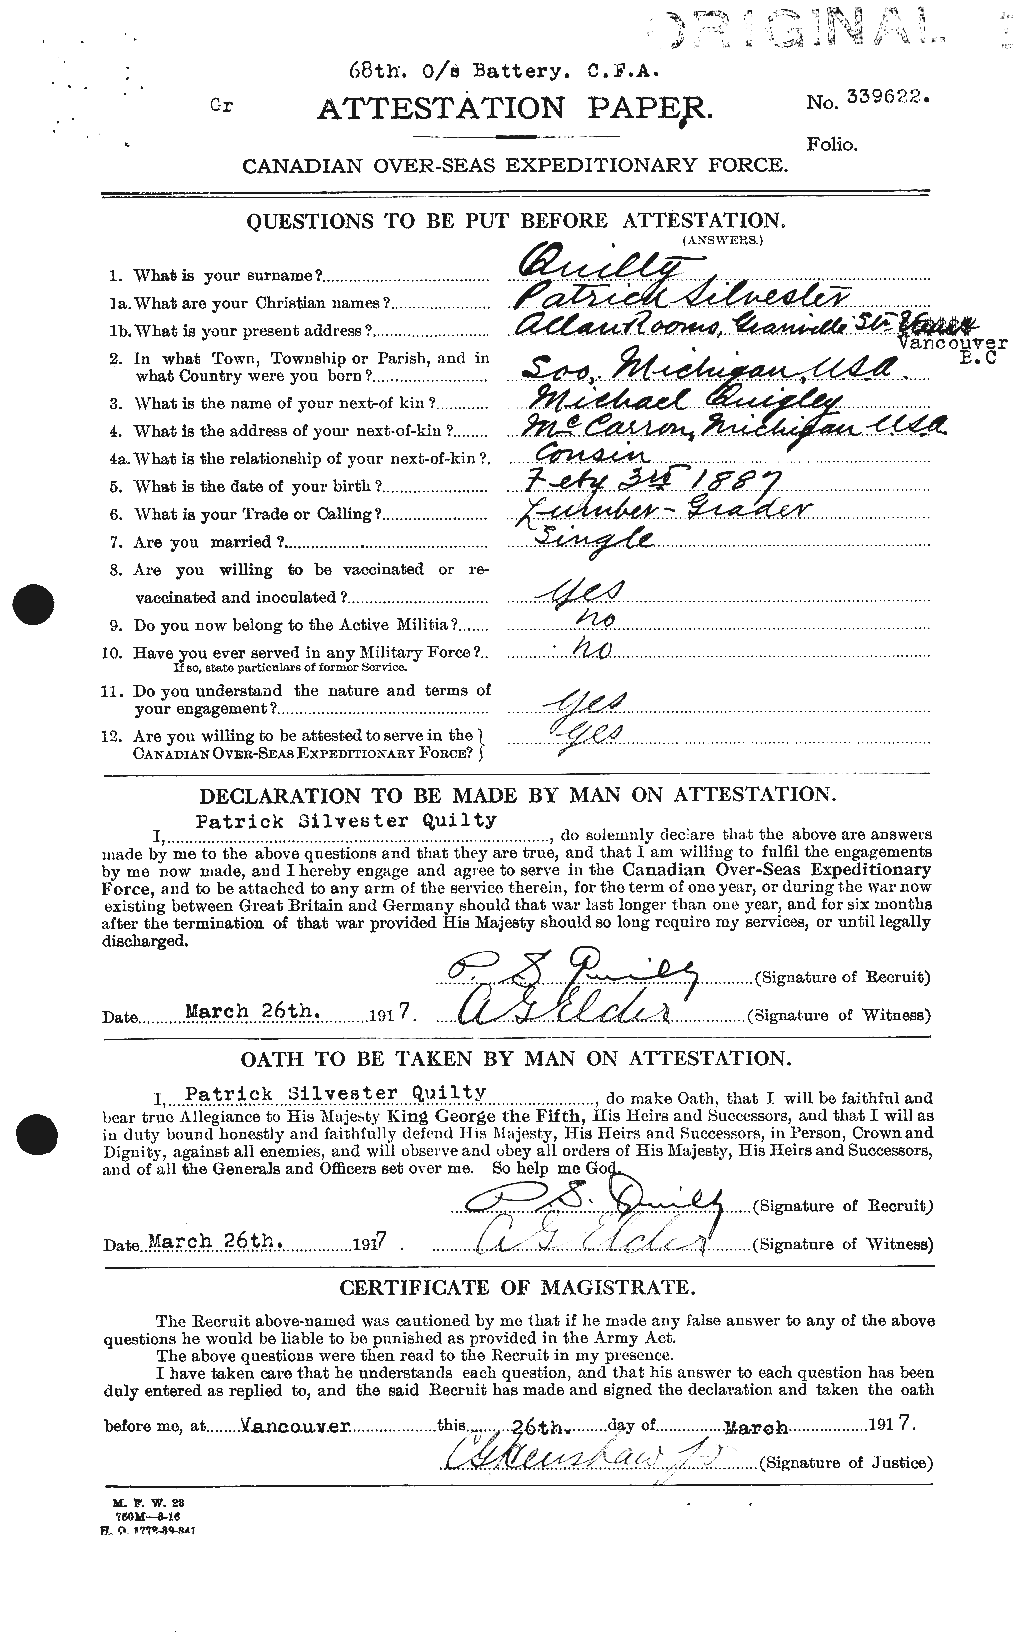 Personnel Records of the First World War - CEF 590145a